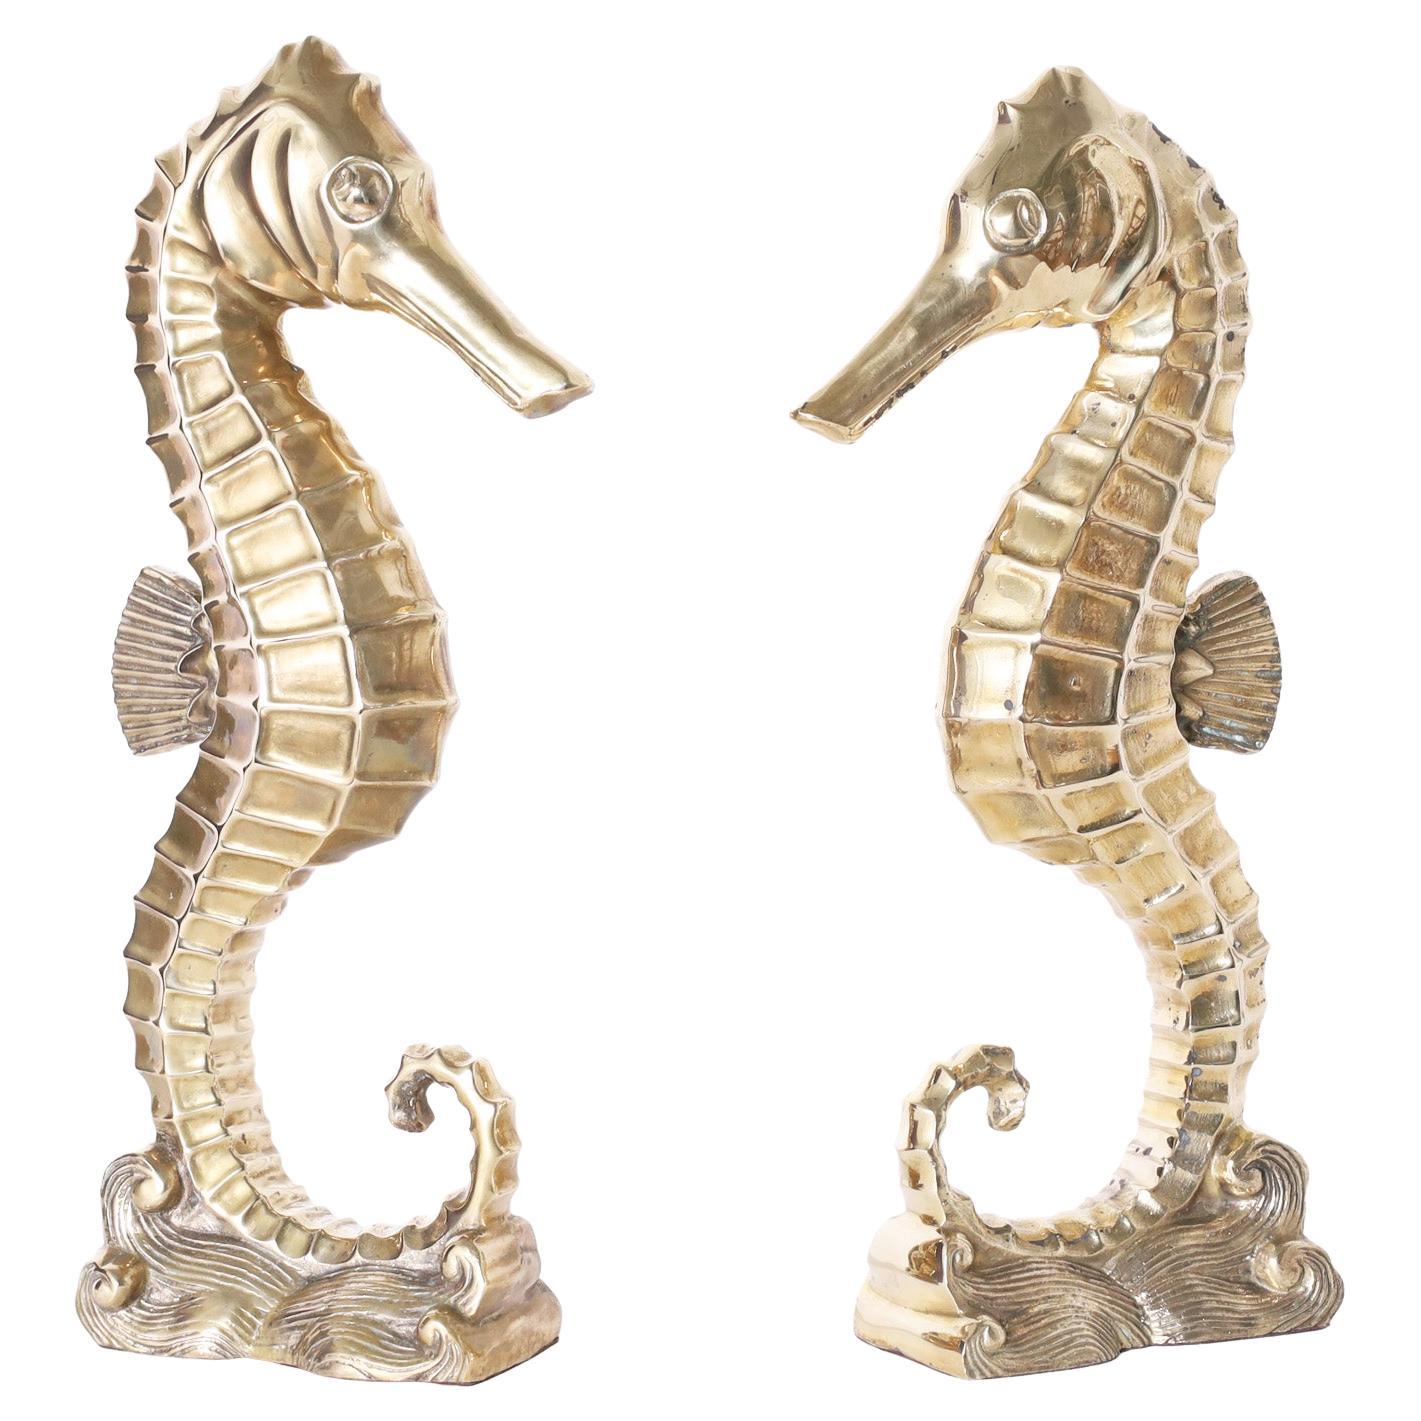 Midcentury Brass Seahorse Sculptures, Priced Individually